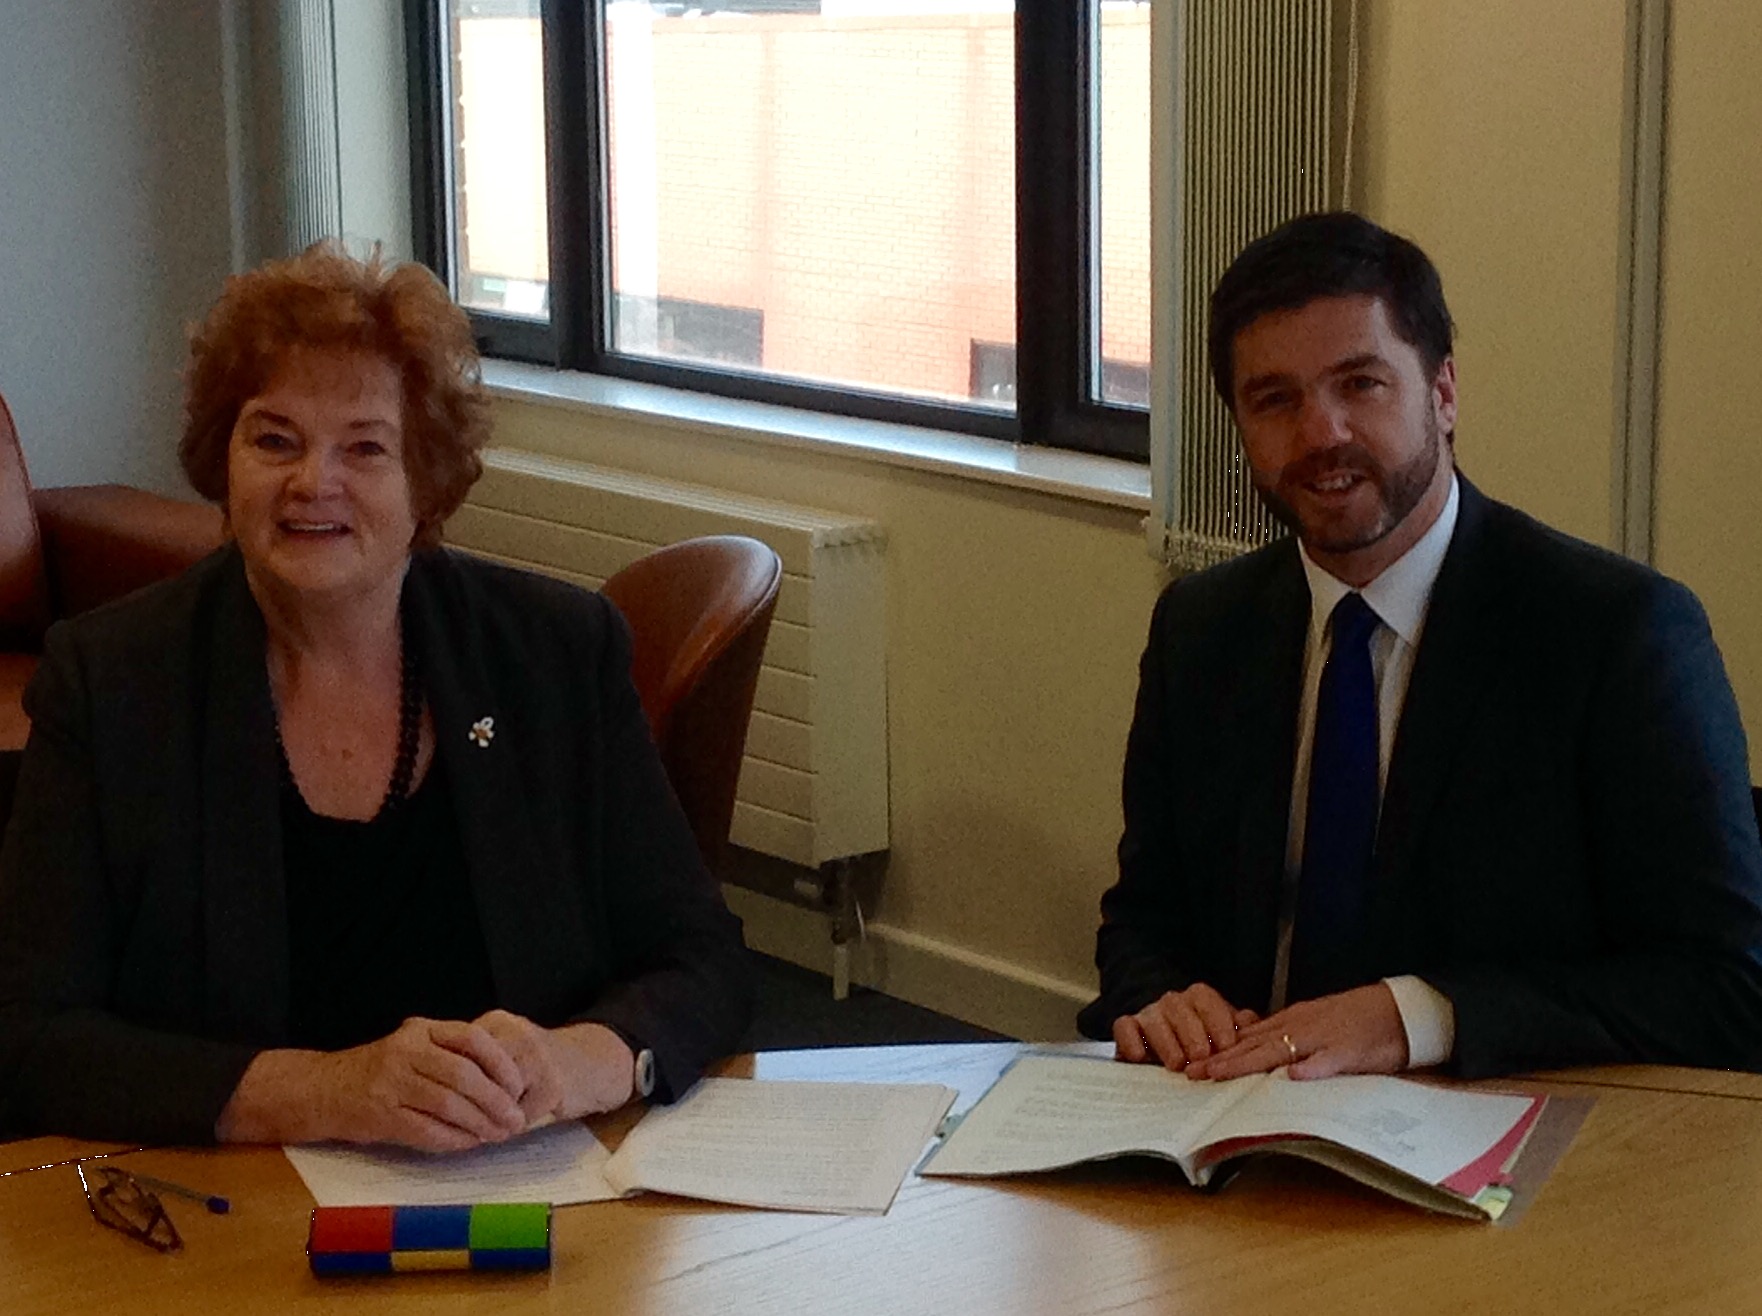 Presiding Officer Rosemary Butler sitting at a table with Stephen Crabb, Secretary of State